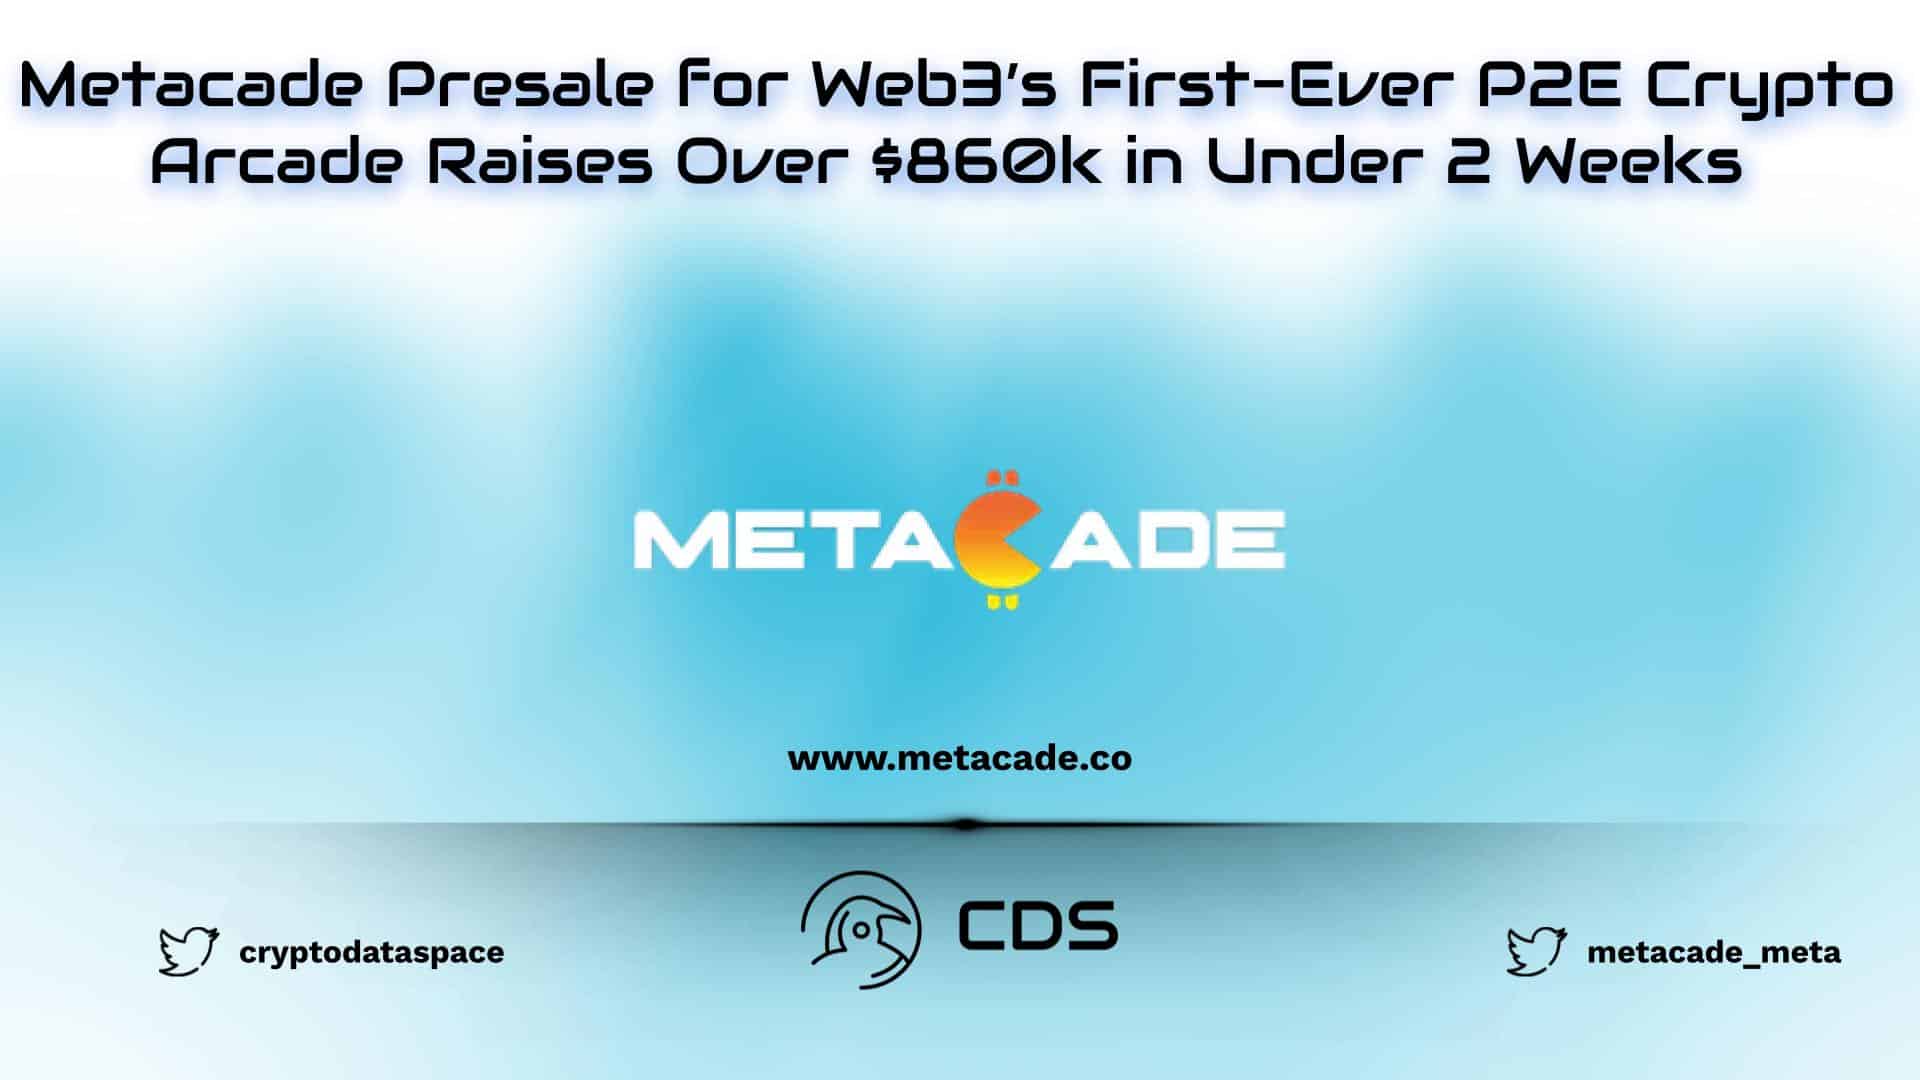 Metacade Presale for Web3's First-Ever P2E Crypto Arcade Raises Over $860k in Under 2 Weeks